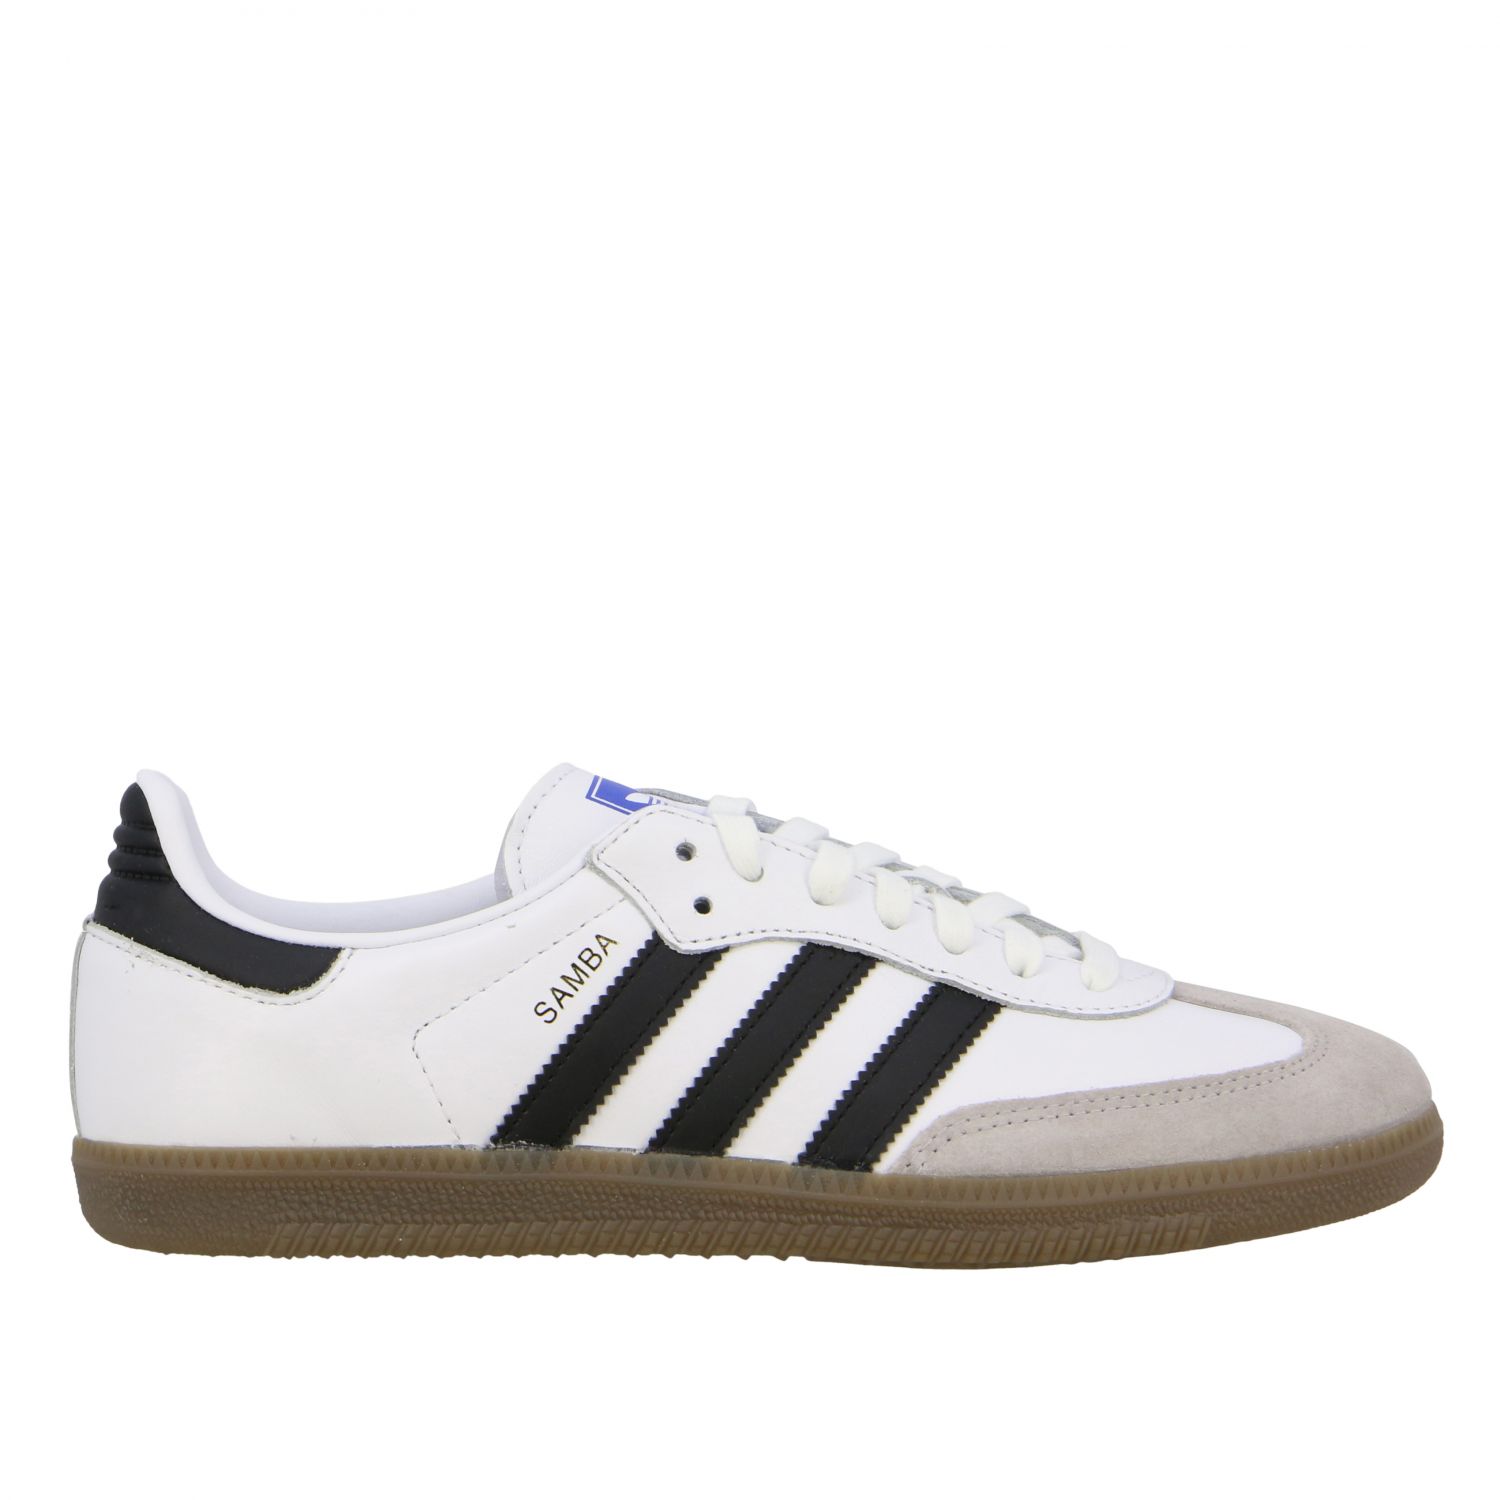 Originals Outlet: Samba sneakers in leather with logo | Sneakers Adidas White Sneakers Adidas Originals B 75806 GIGLIO.COM